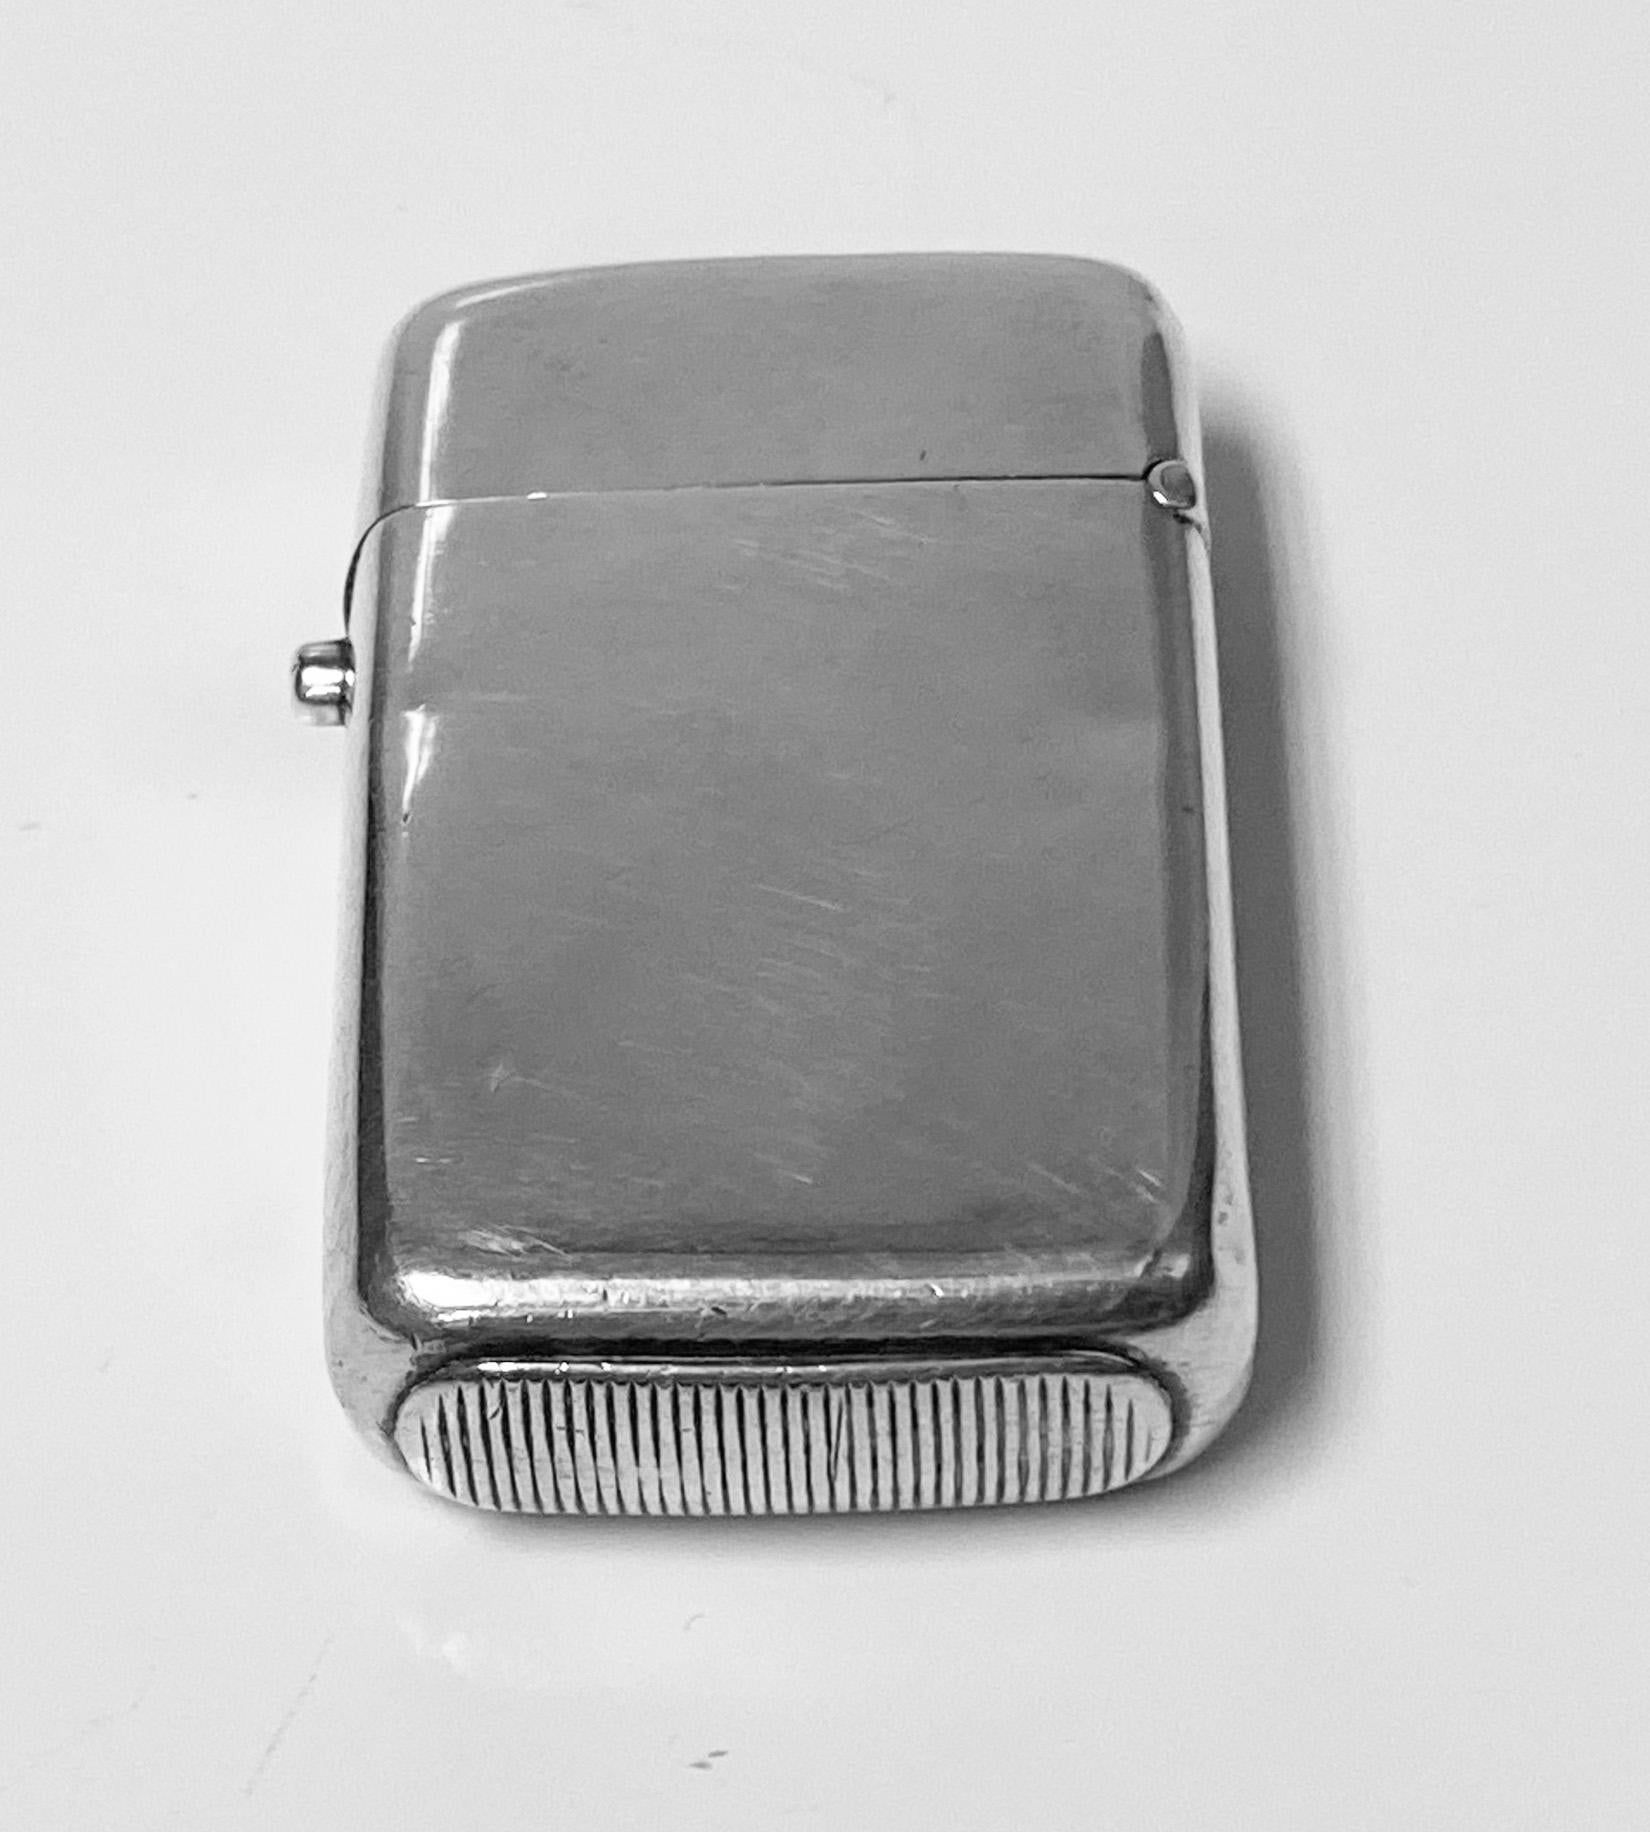 Antique silver Vesta London 1876 William Summers. Plain rectangular form, striker on base, one side engraved possibly JMC 1878. Measures: 1.75 x 1.00 inches. Item Weight: 24.90. Good thick guage of silver, nice patina.